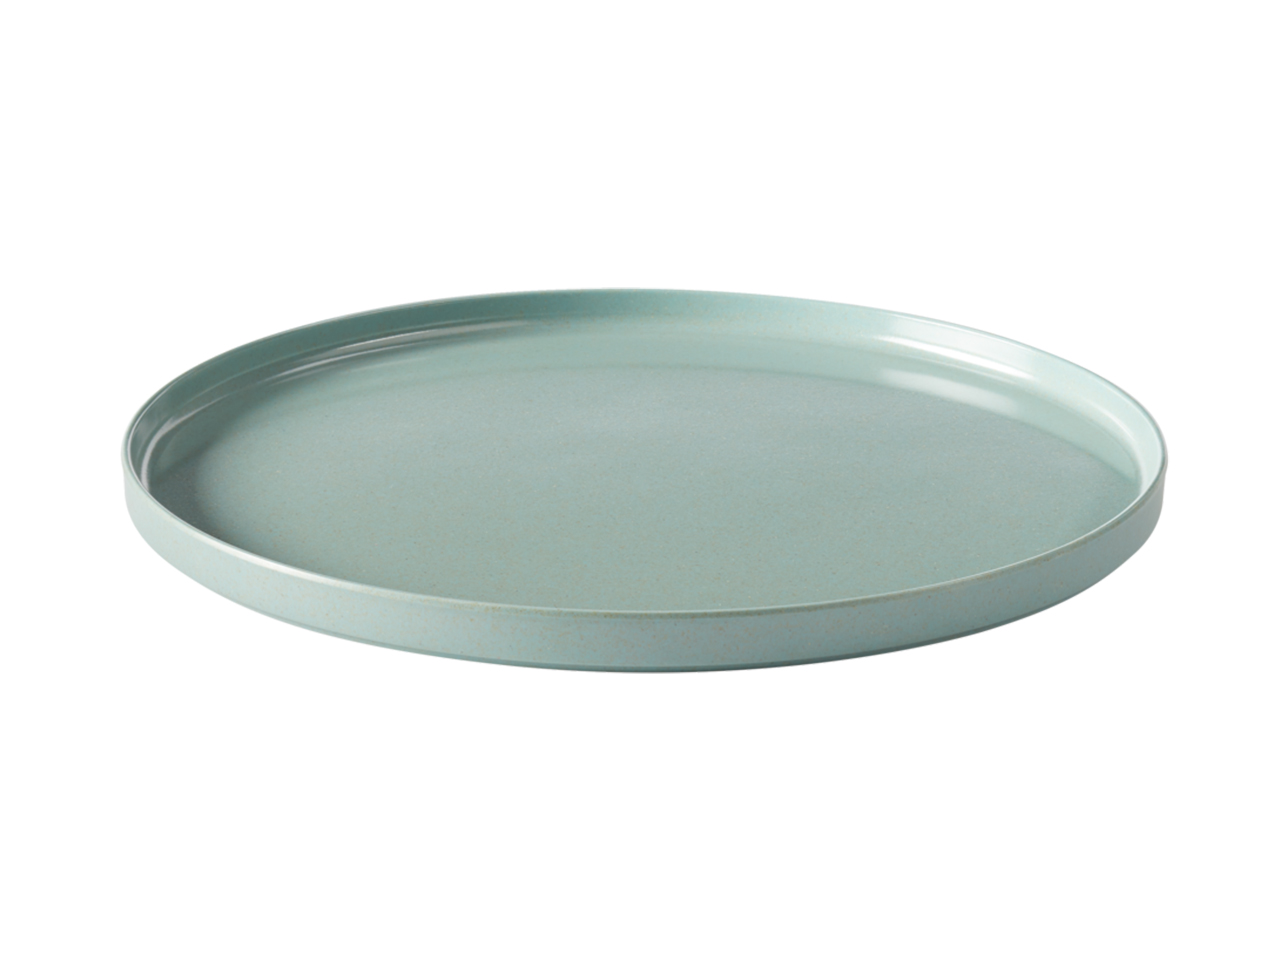 A teal melamine plate from Canvas for outdoor entertaining.